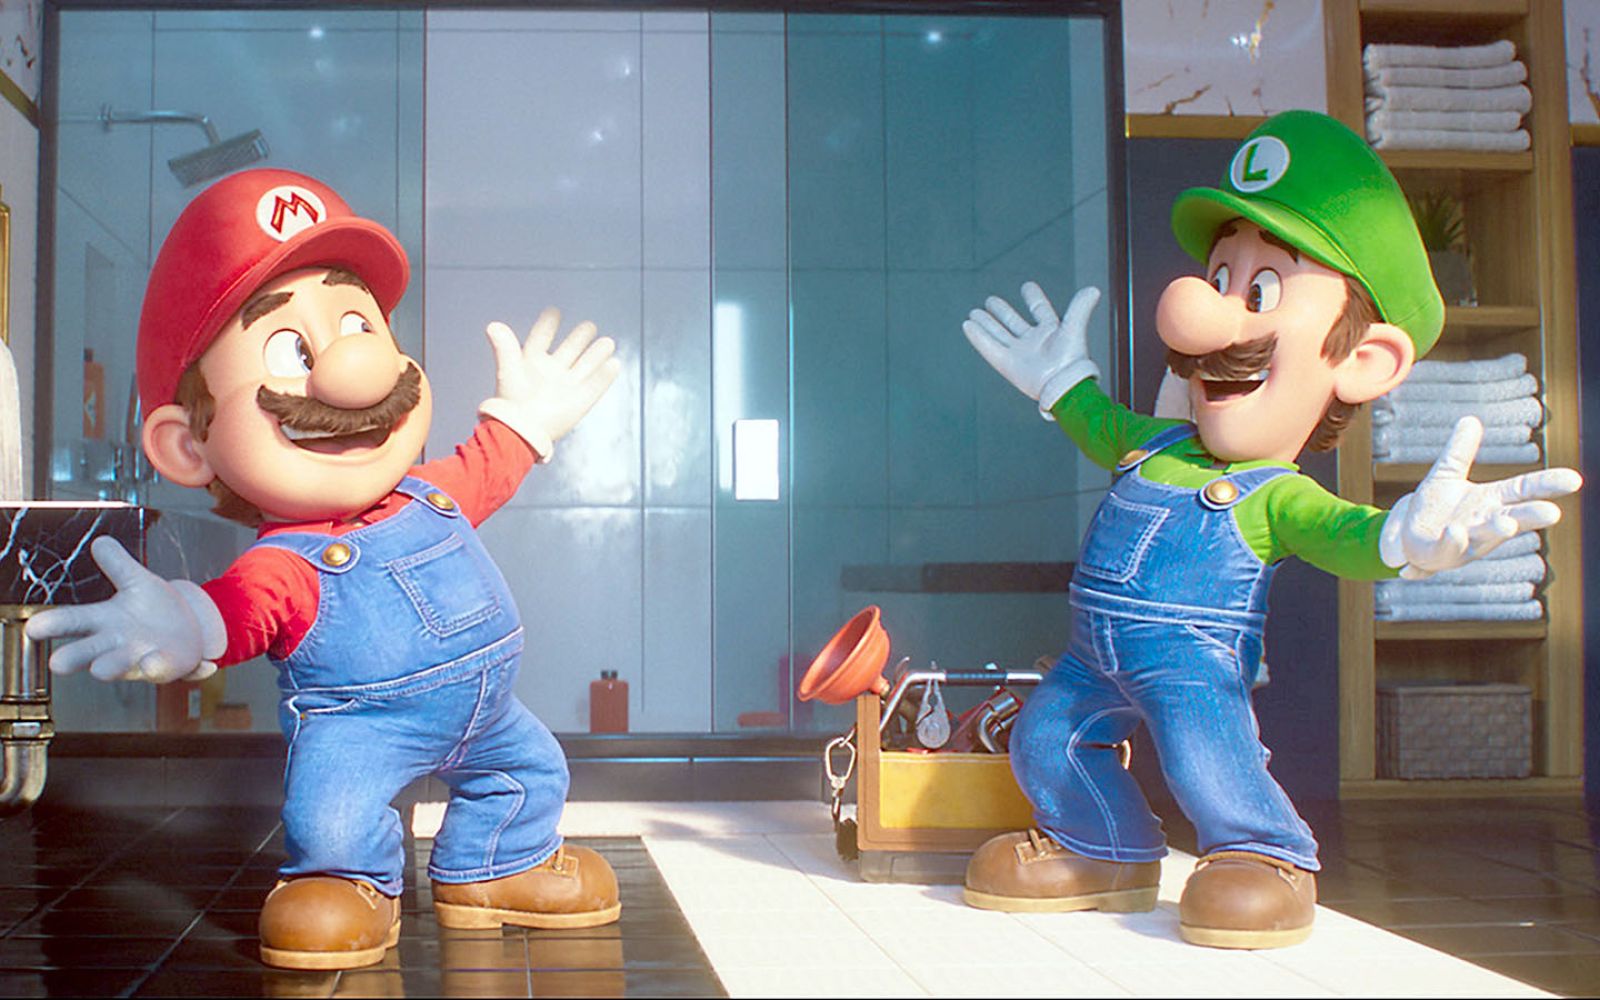 The Super Mario Bros. Movie, starring the voices of Chris Pratt as Mario and Charlie Day as Luigi, dominated the U.S. box office in its opening weekend.